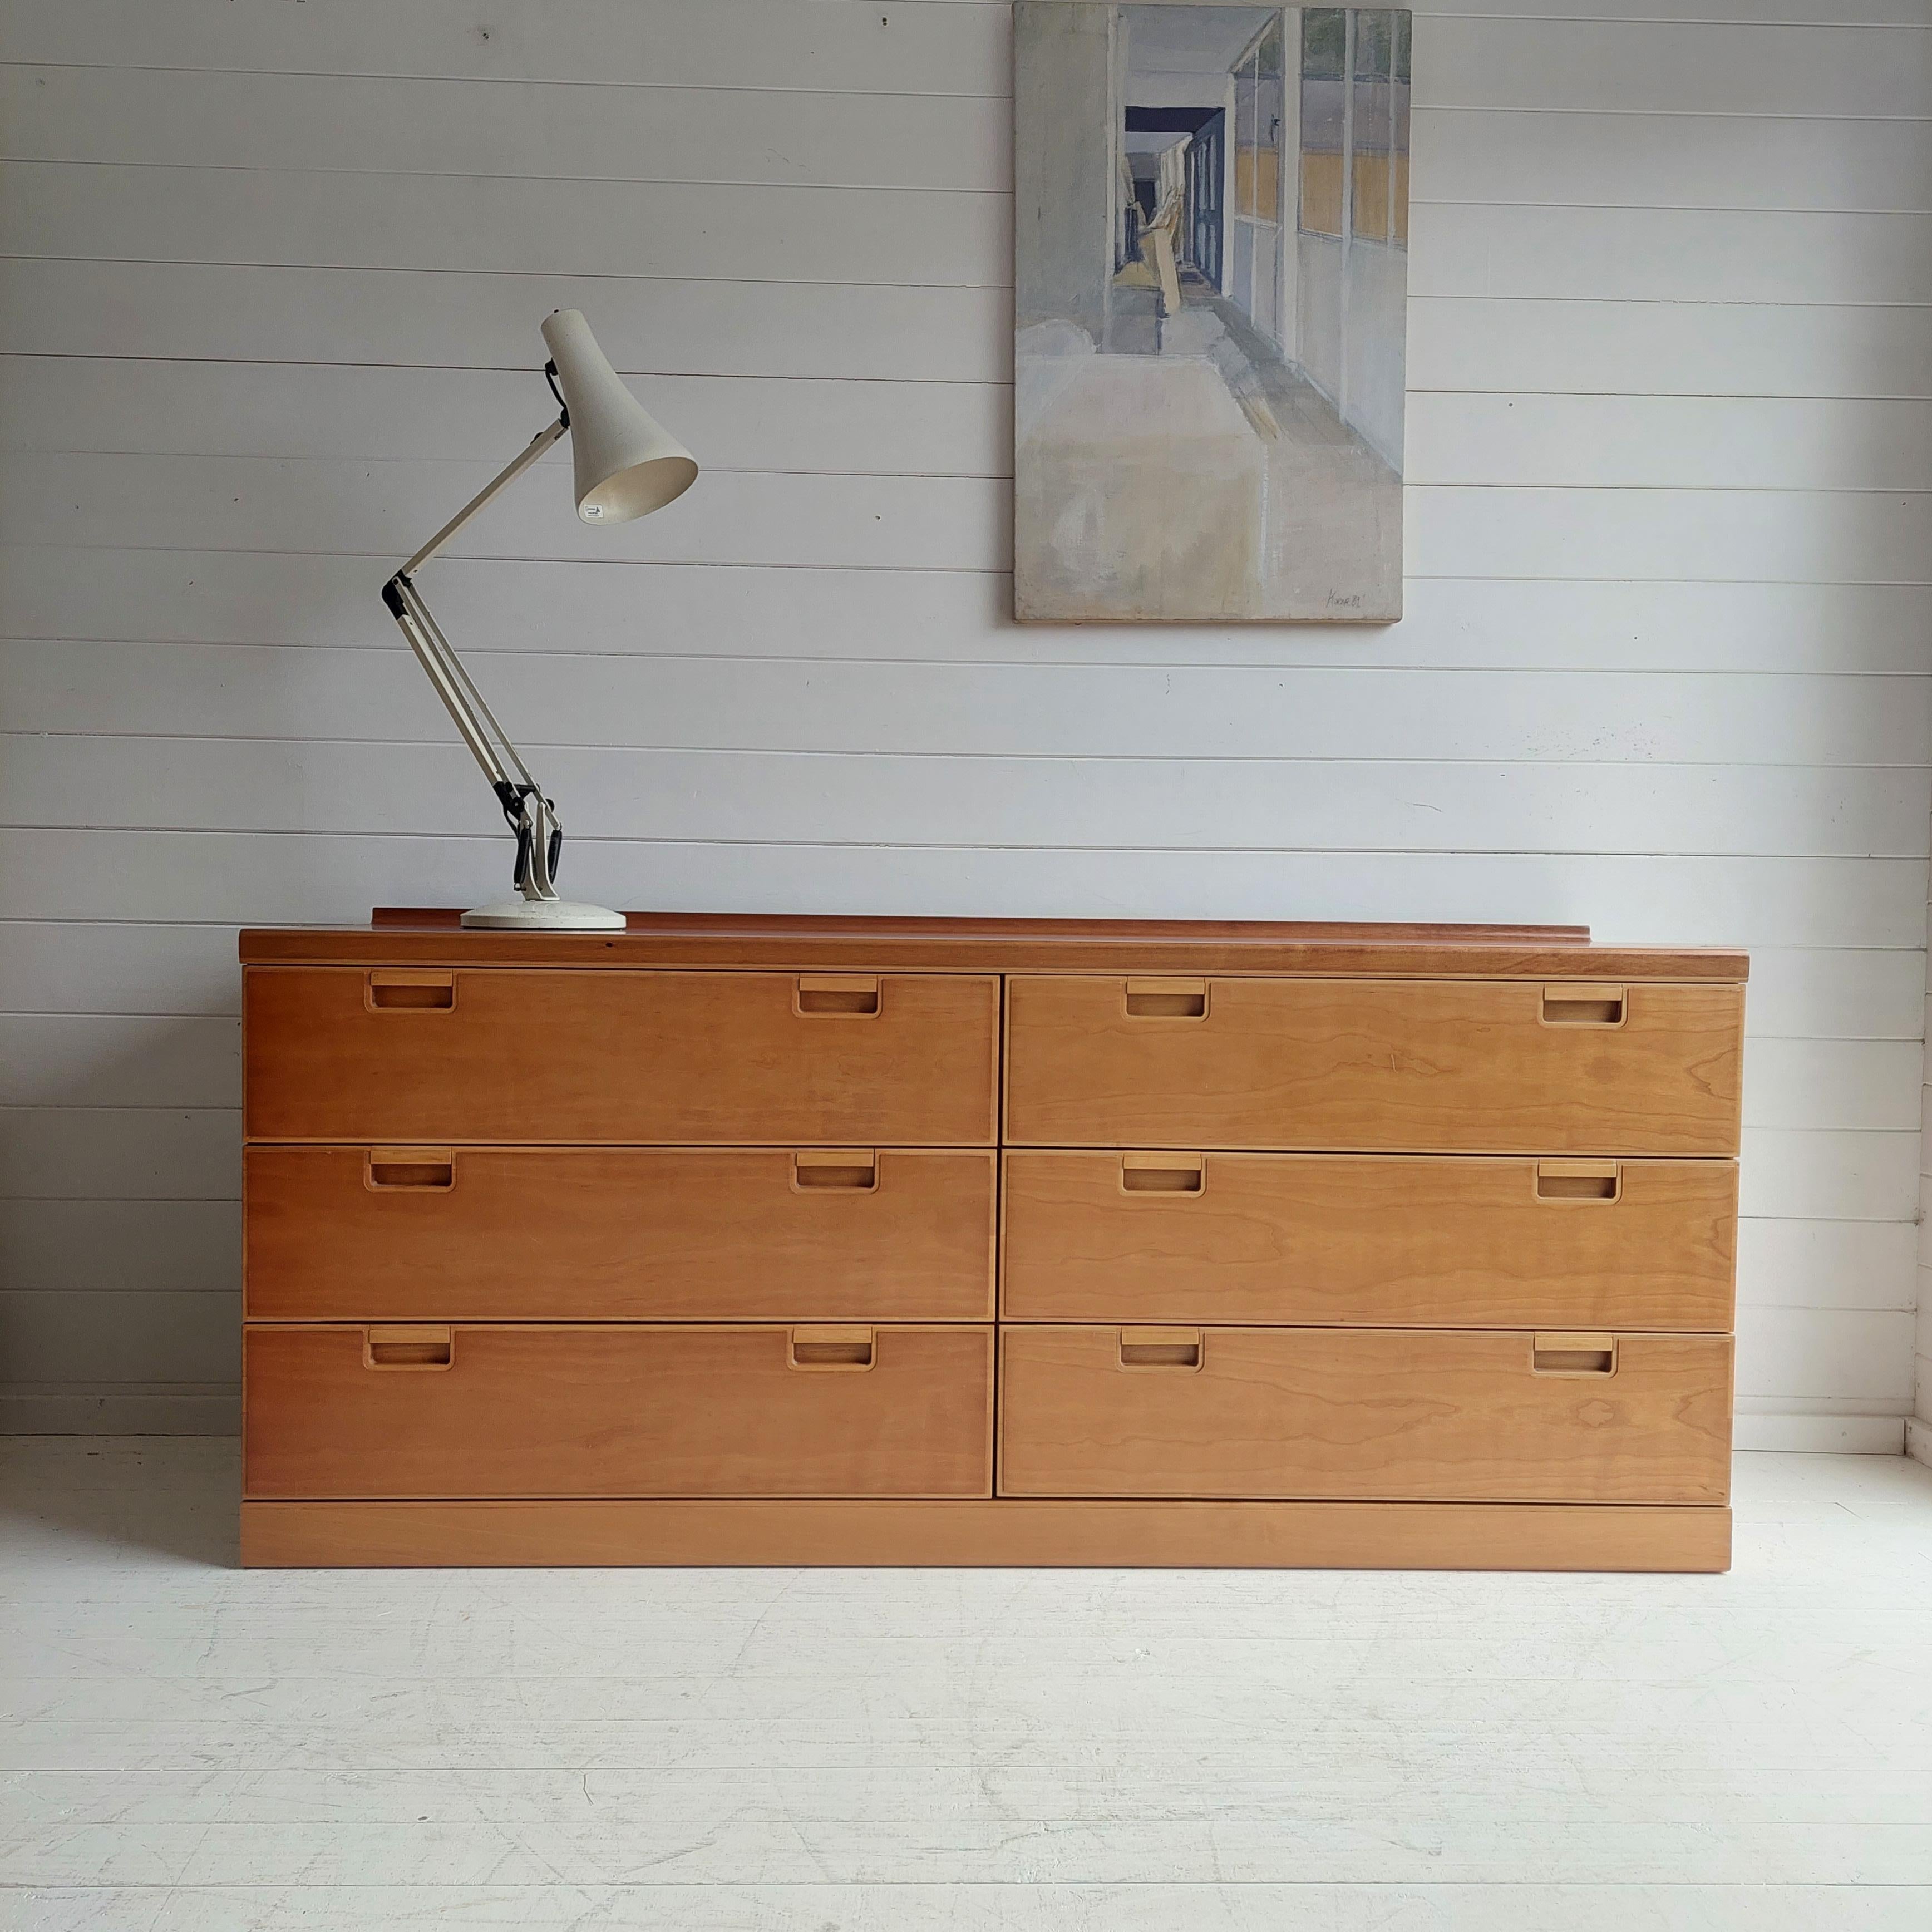 Midcentury White and Newton multi drawers / sideboard in light teak with beech trim, 1960s
A beautifully simplistic teak sideboard / bank of drawers designed & manufactured by White & Newton of Portsmouth circa 1960s/70s.

Featuring minimalistic